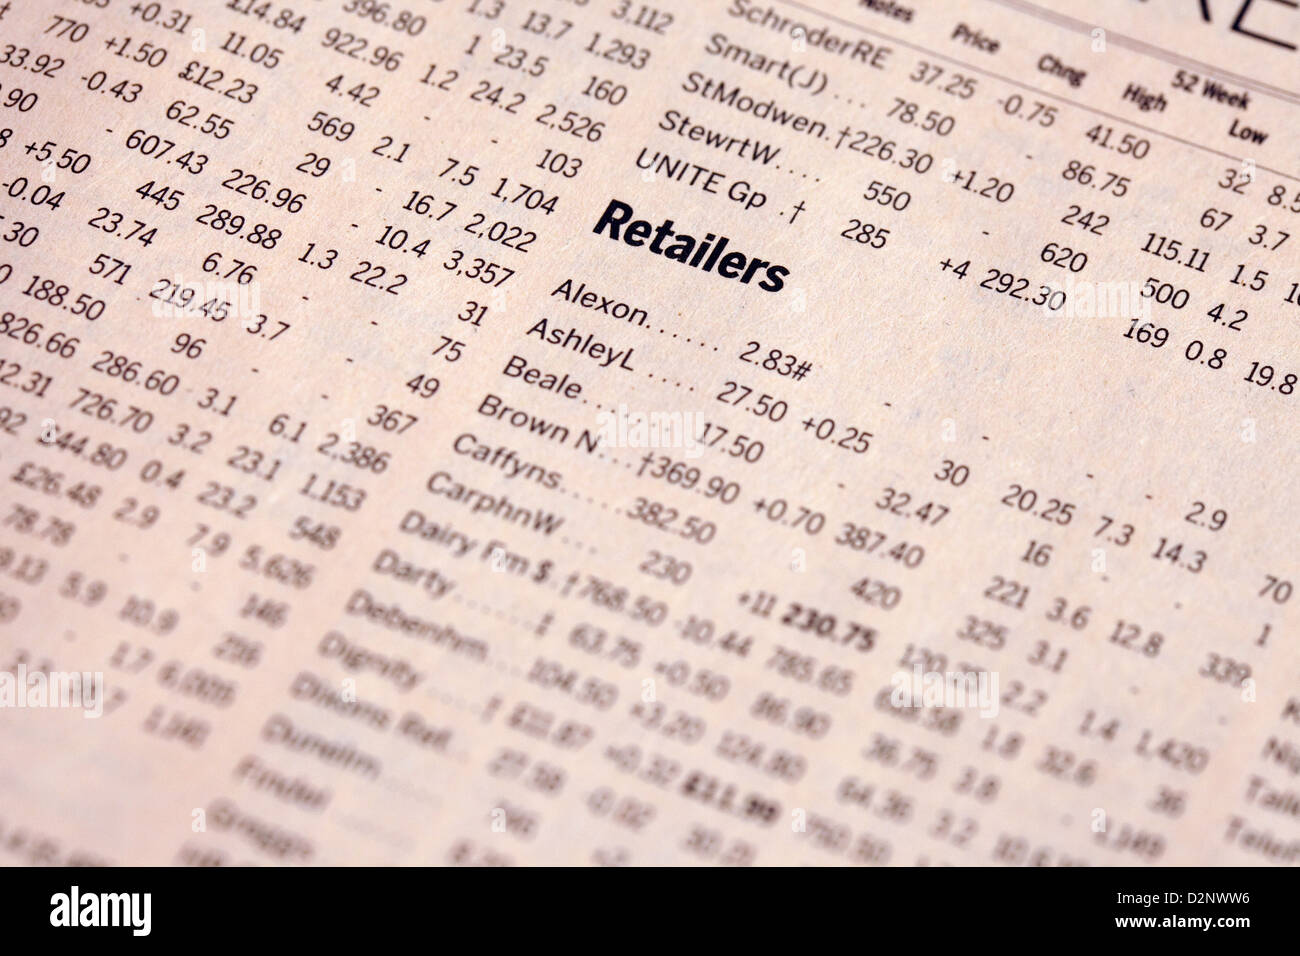 Retailers list of stocks and shares in the Financial Times newspaper, UK Stock Photo